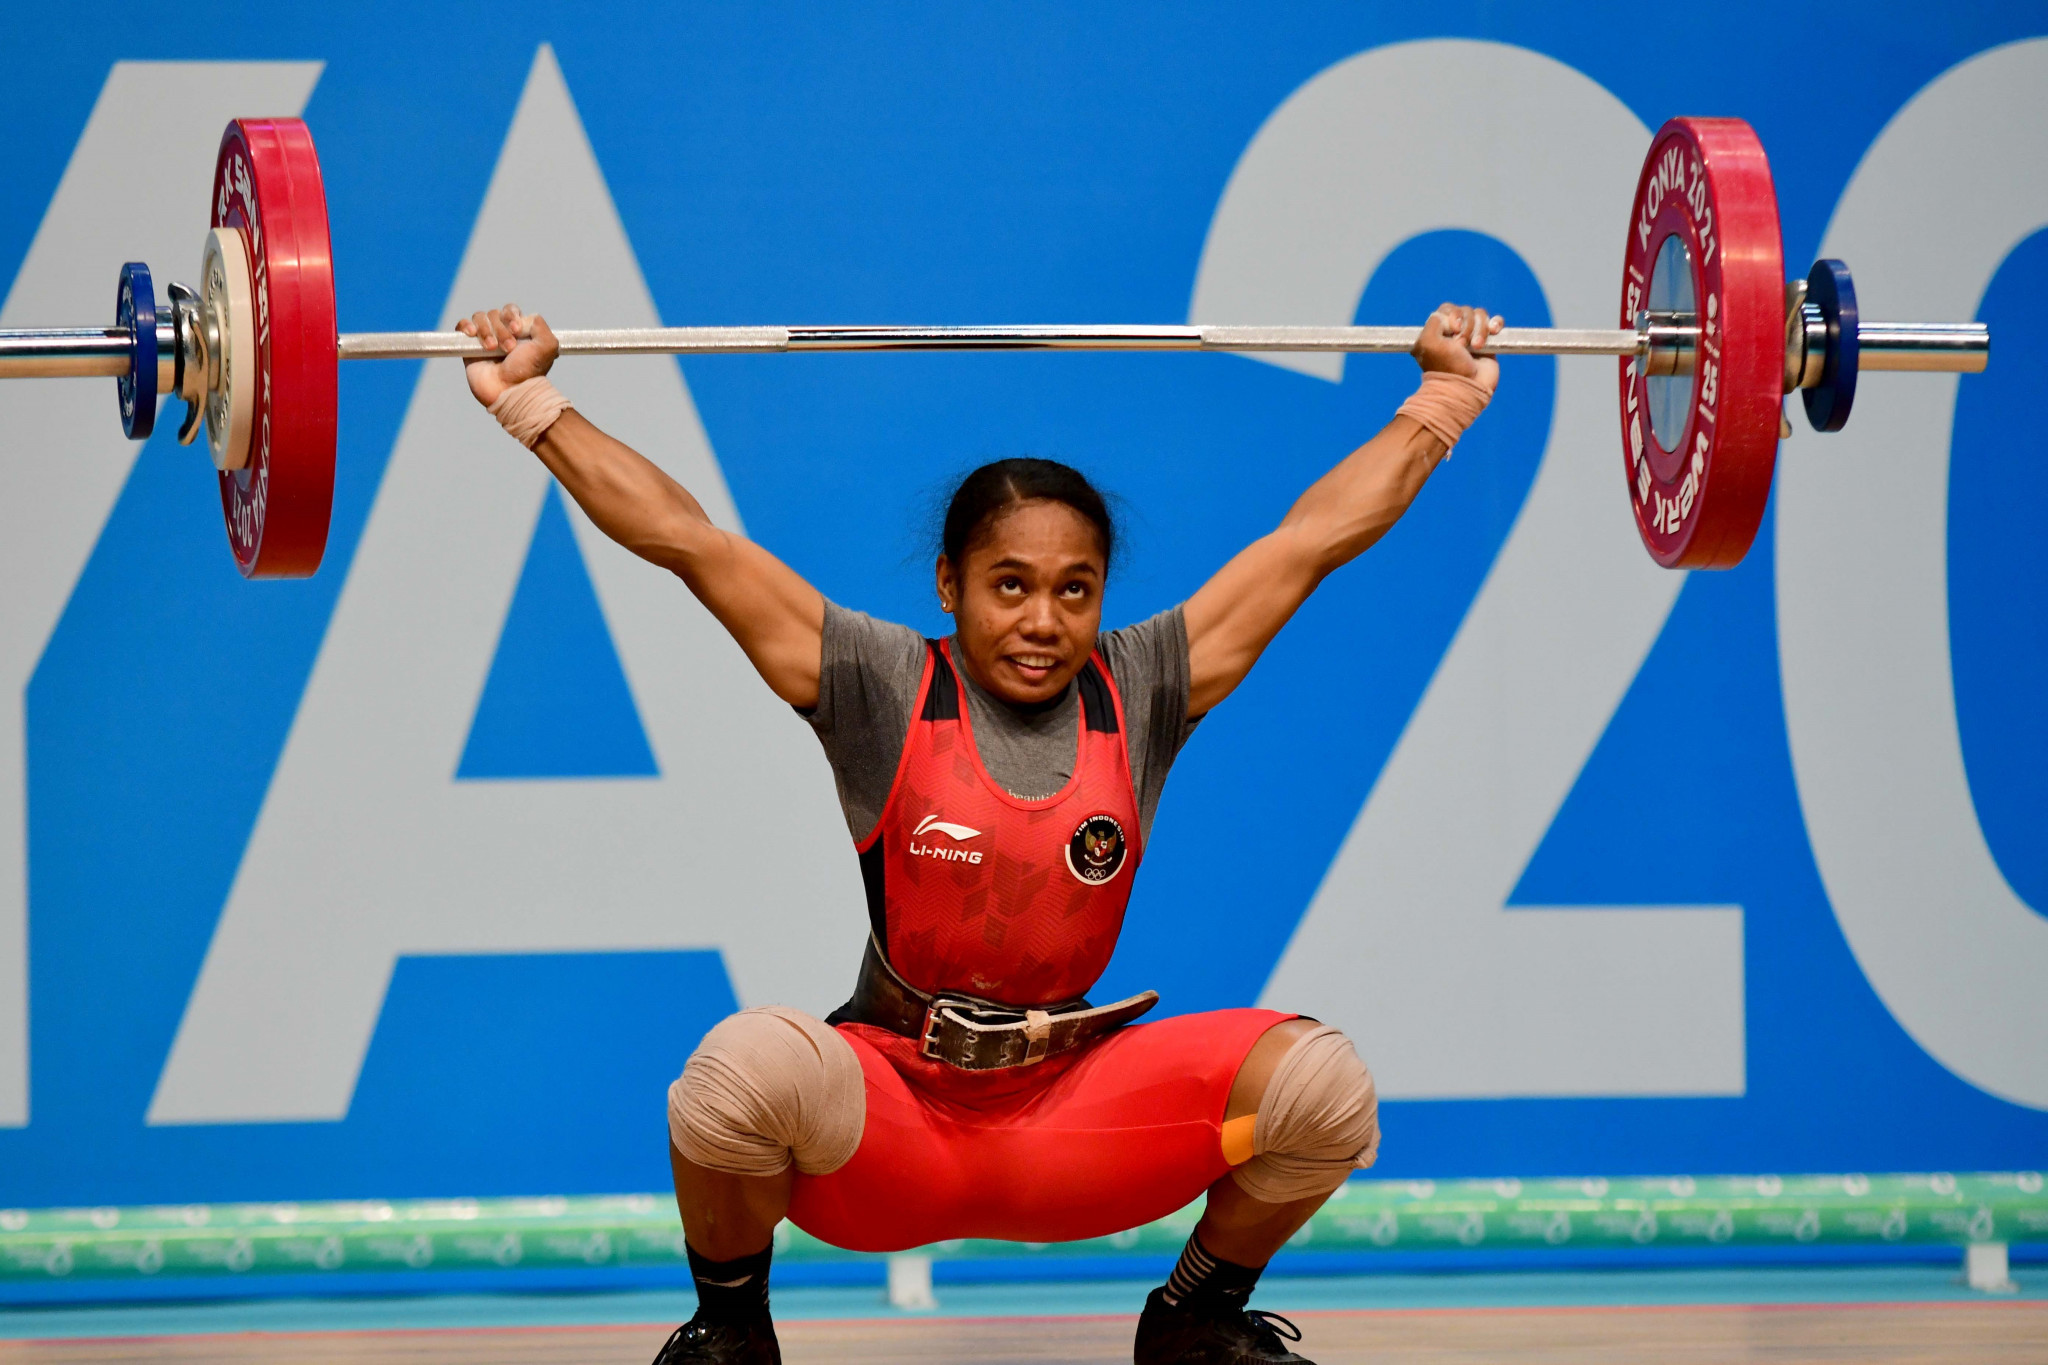 Indonesia's Natasya Beteyob pulled off a brilliant final lift to see her clinch the women's 55kg crown ©Konya 2021